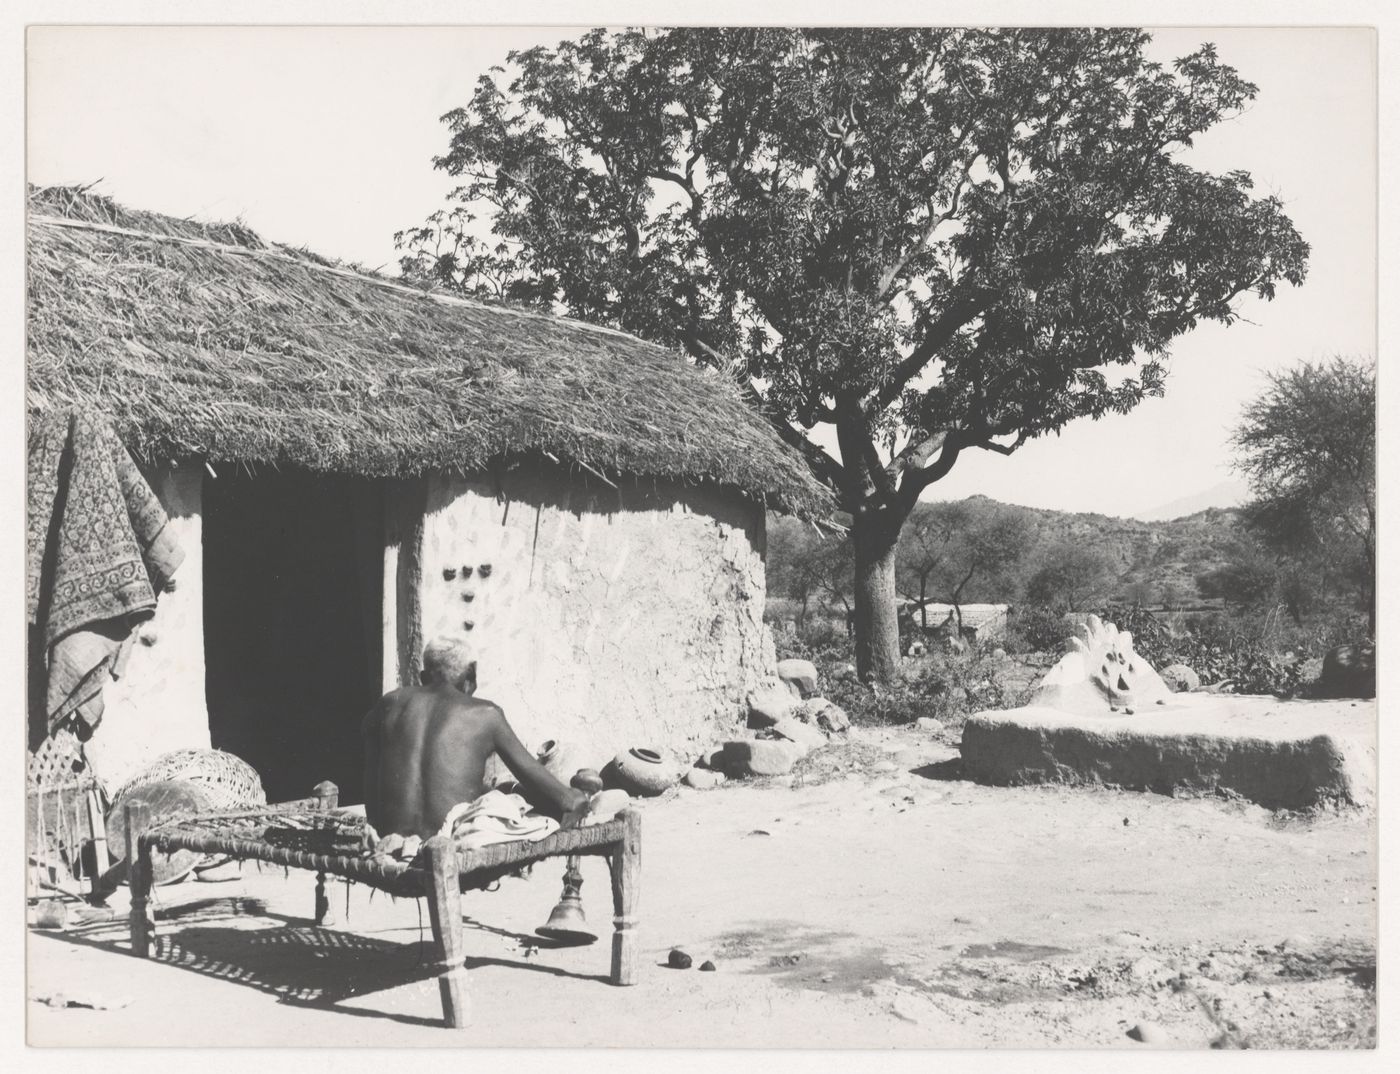 View of seated man in rural housing complex near Chandigarh, India